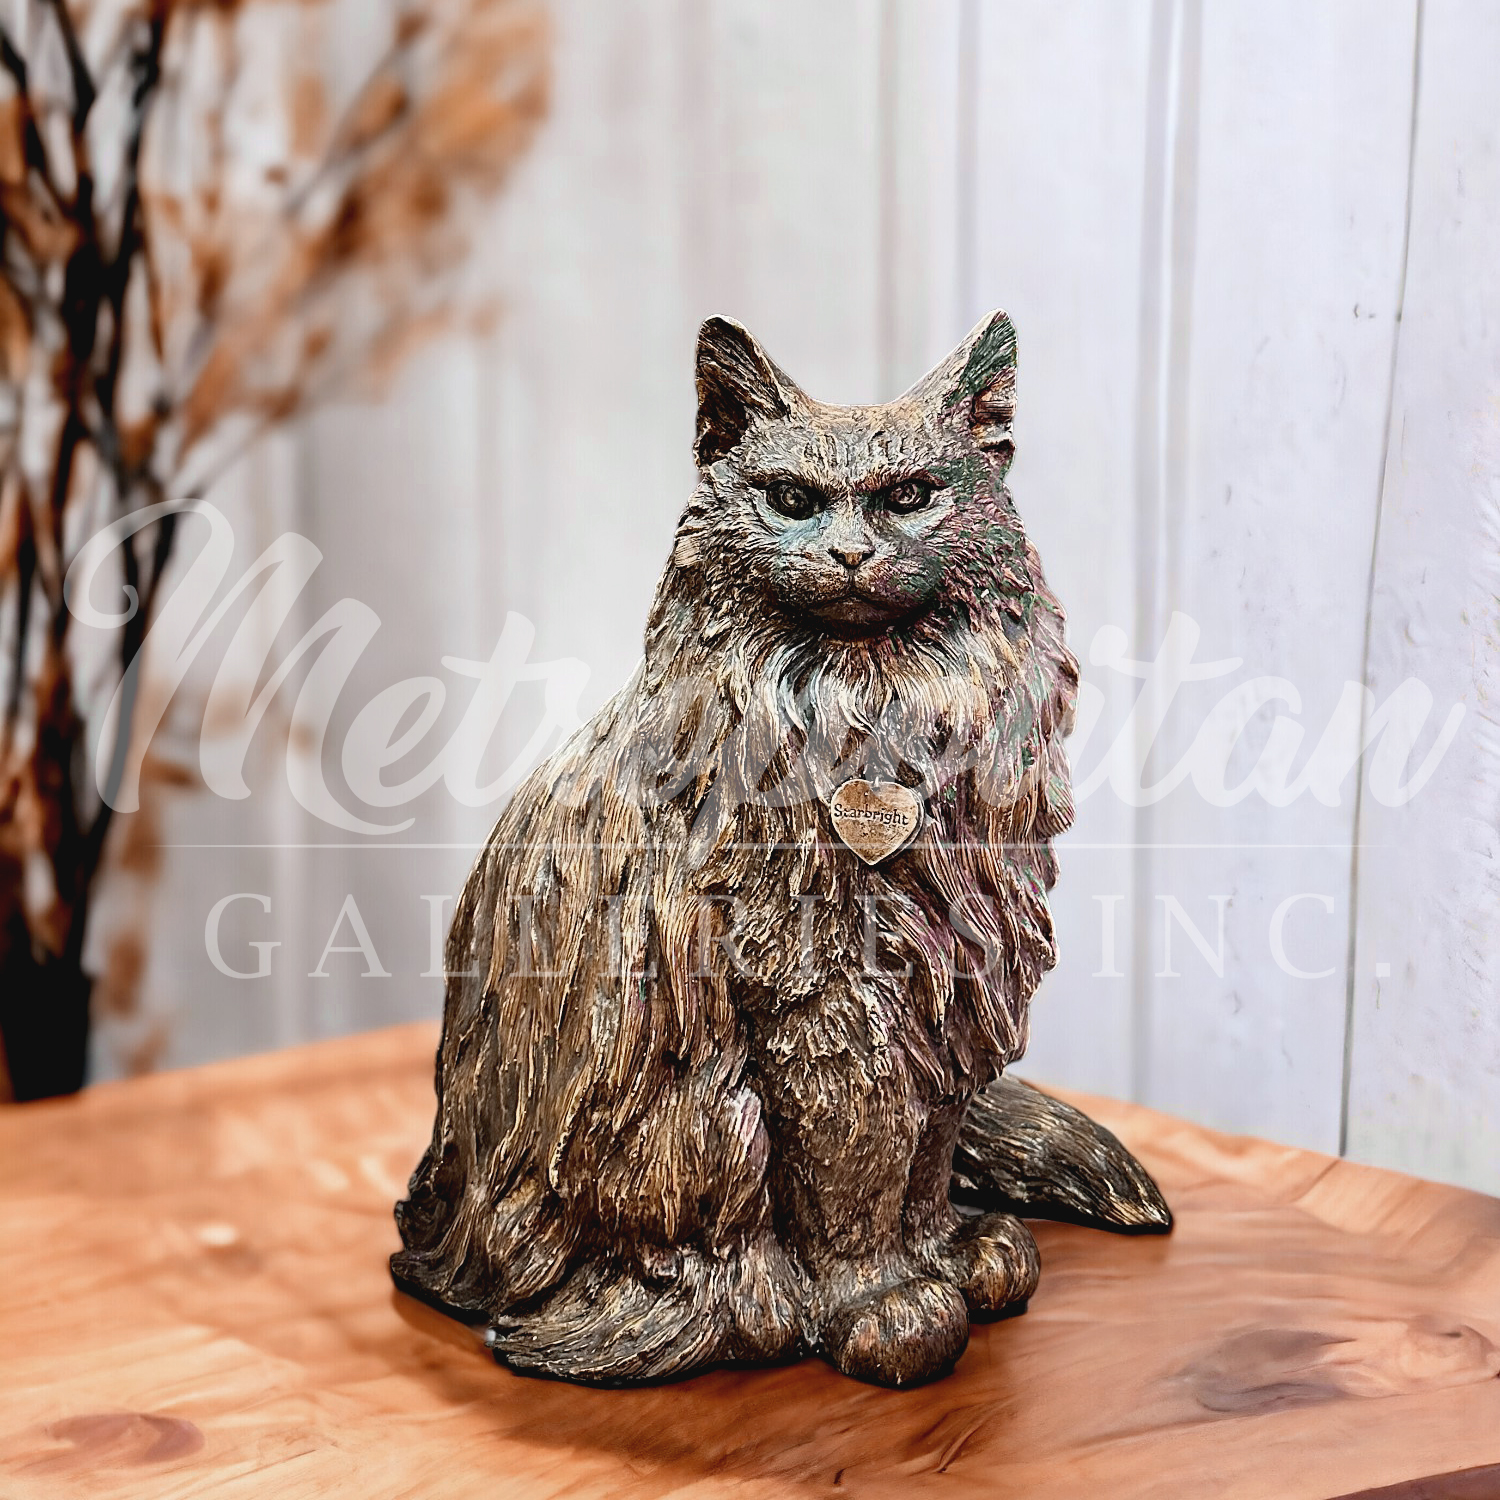 SRB10132 Bronze Starbright Maine Coon Cat Sculpture excludively designed and produced by Metropolitan Galleries Inc Vignette AI WM our beloved kitty